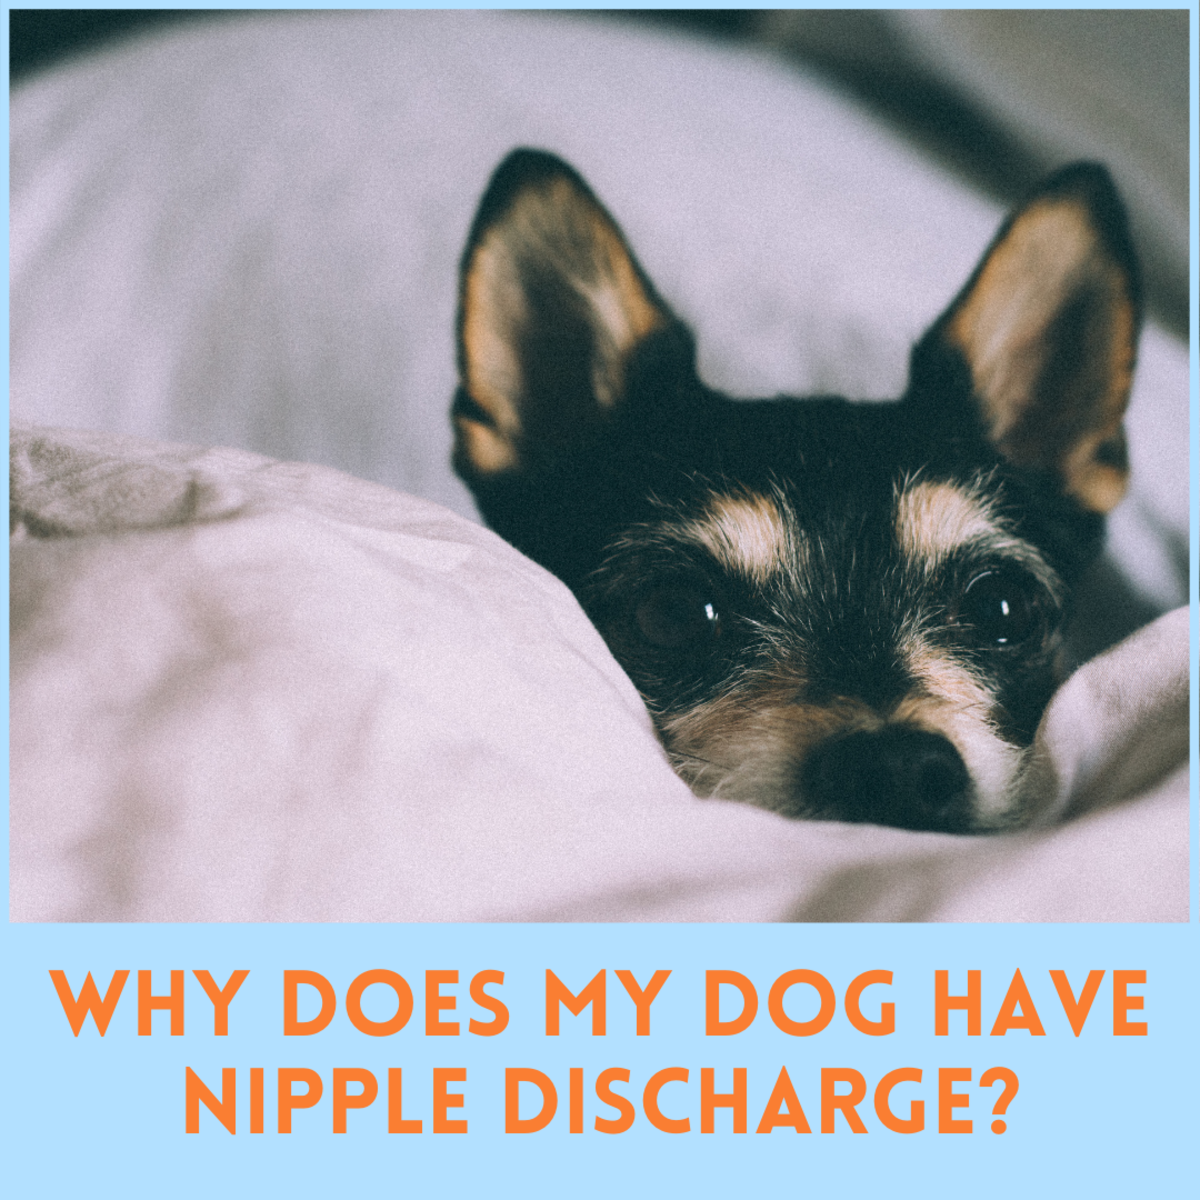 Nipple discharge in dogs isn't always cause for alarm, but it should never be ignored. 